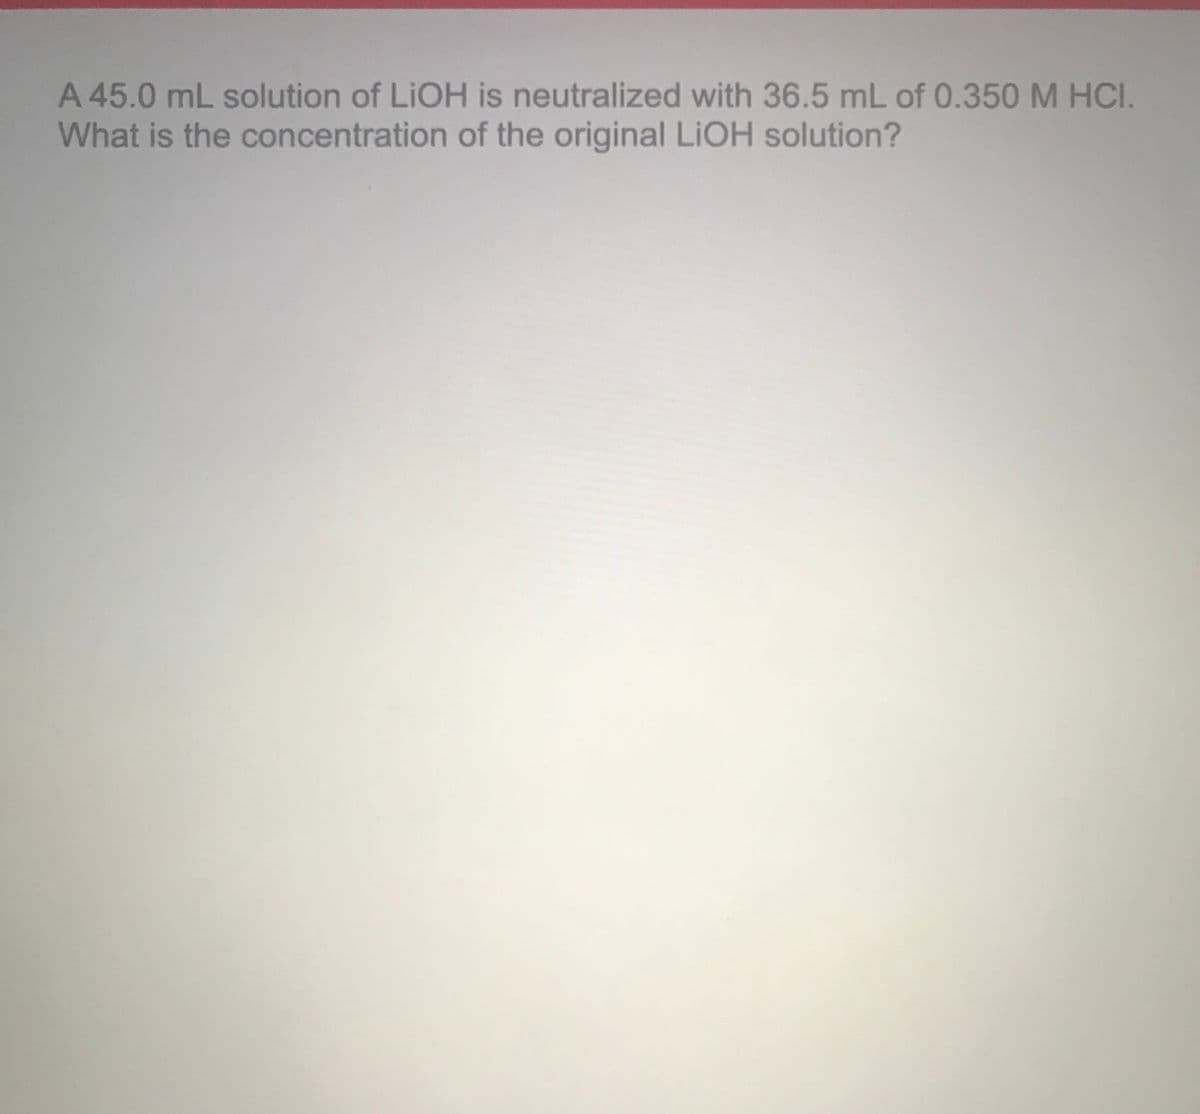 A 45.0 mL solution of LIOH is neutralized with 36.5 mL of 0.350 M HCI.
What is the concentration of the original LIOH solution?
